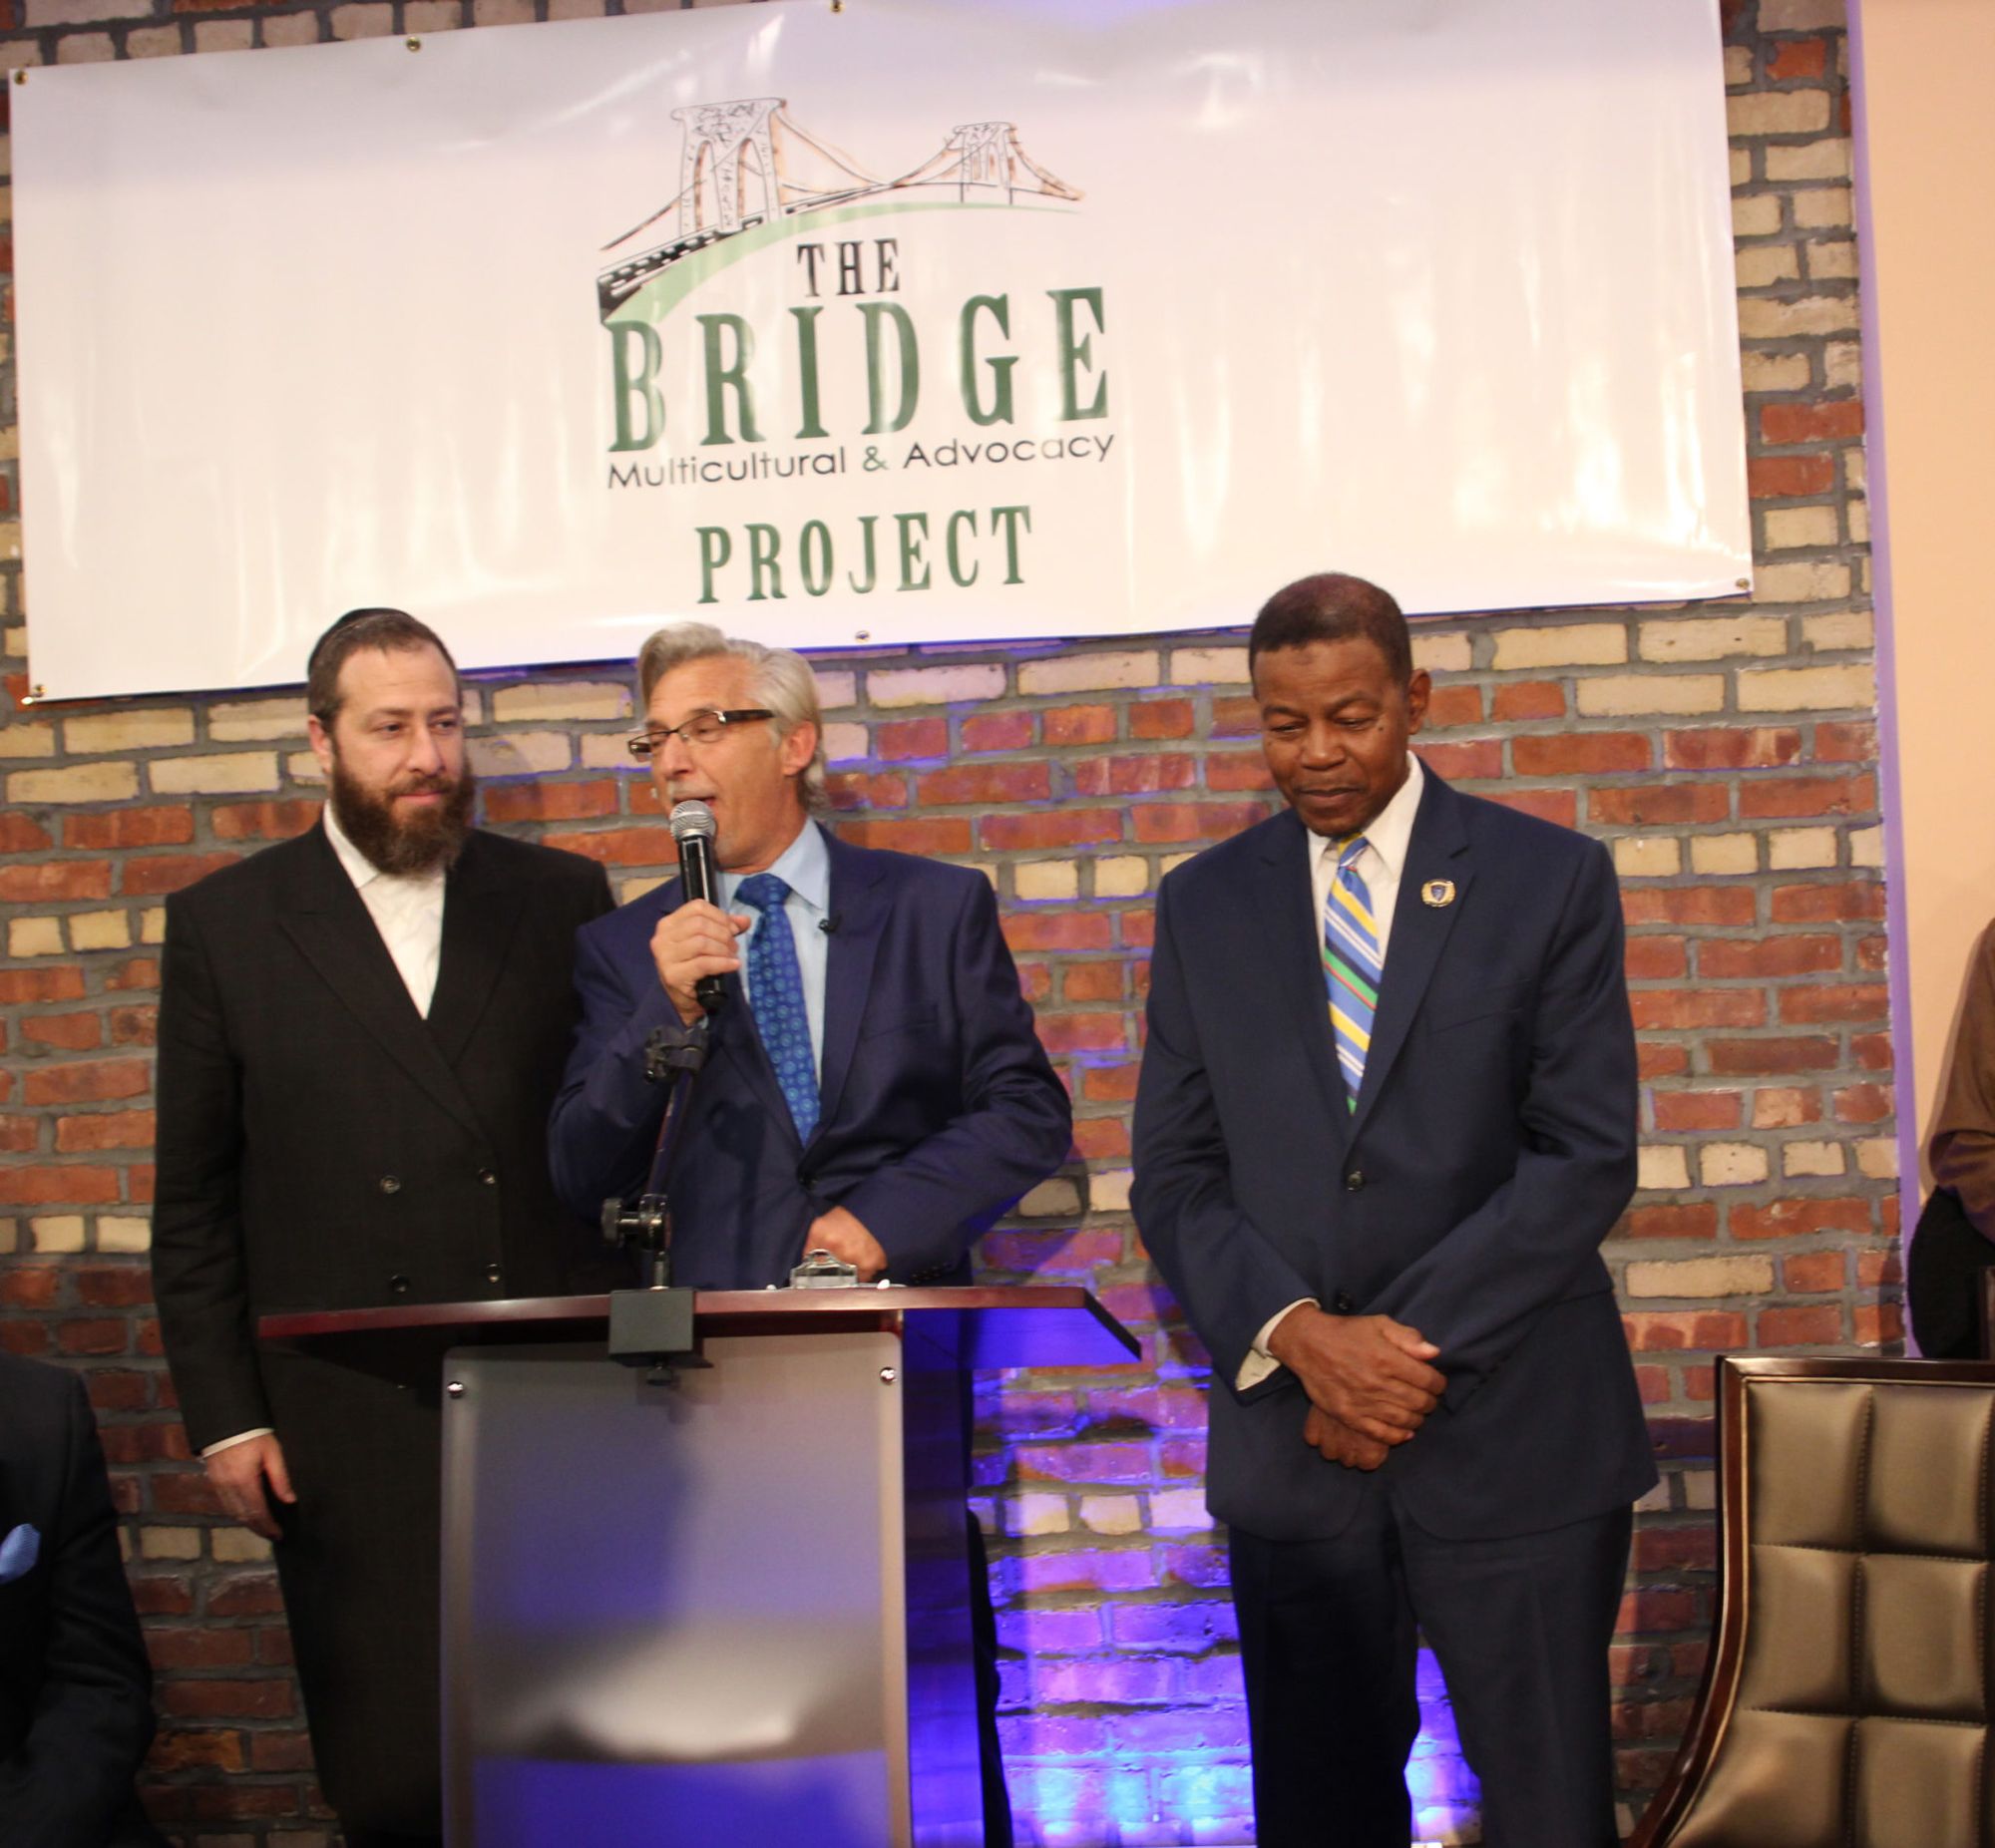 Founder of the Bridge Community Center Mark Meyers Appel, center, presents Ezra Fieldlander, CEO of the Friedlander Group, left, and District Leader Ed Powell with the Hero's Award.